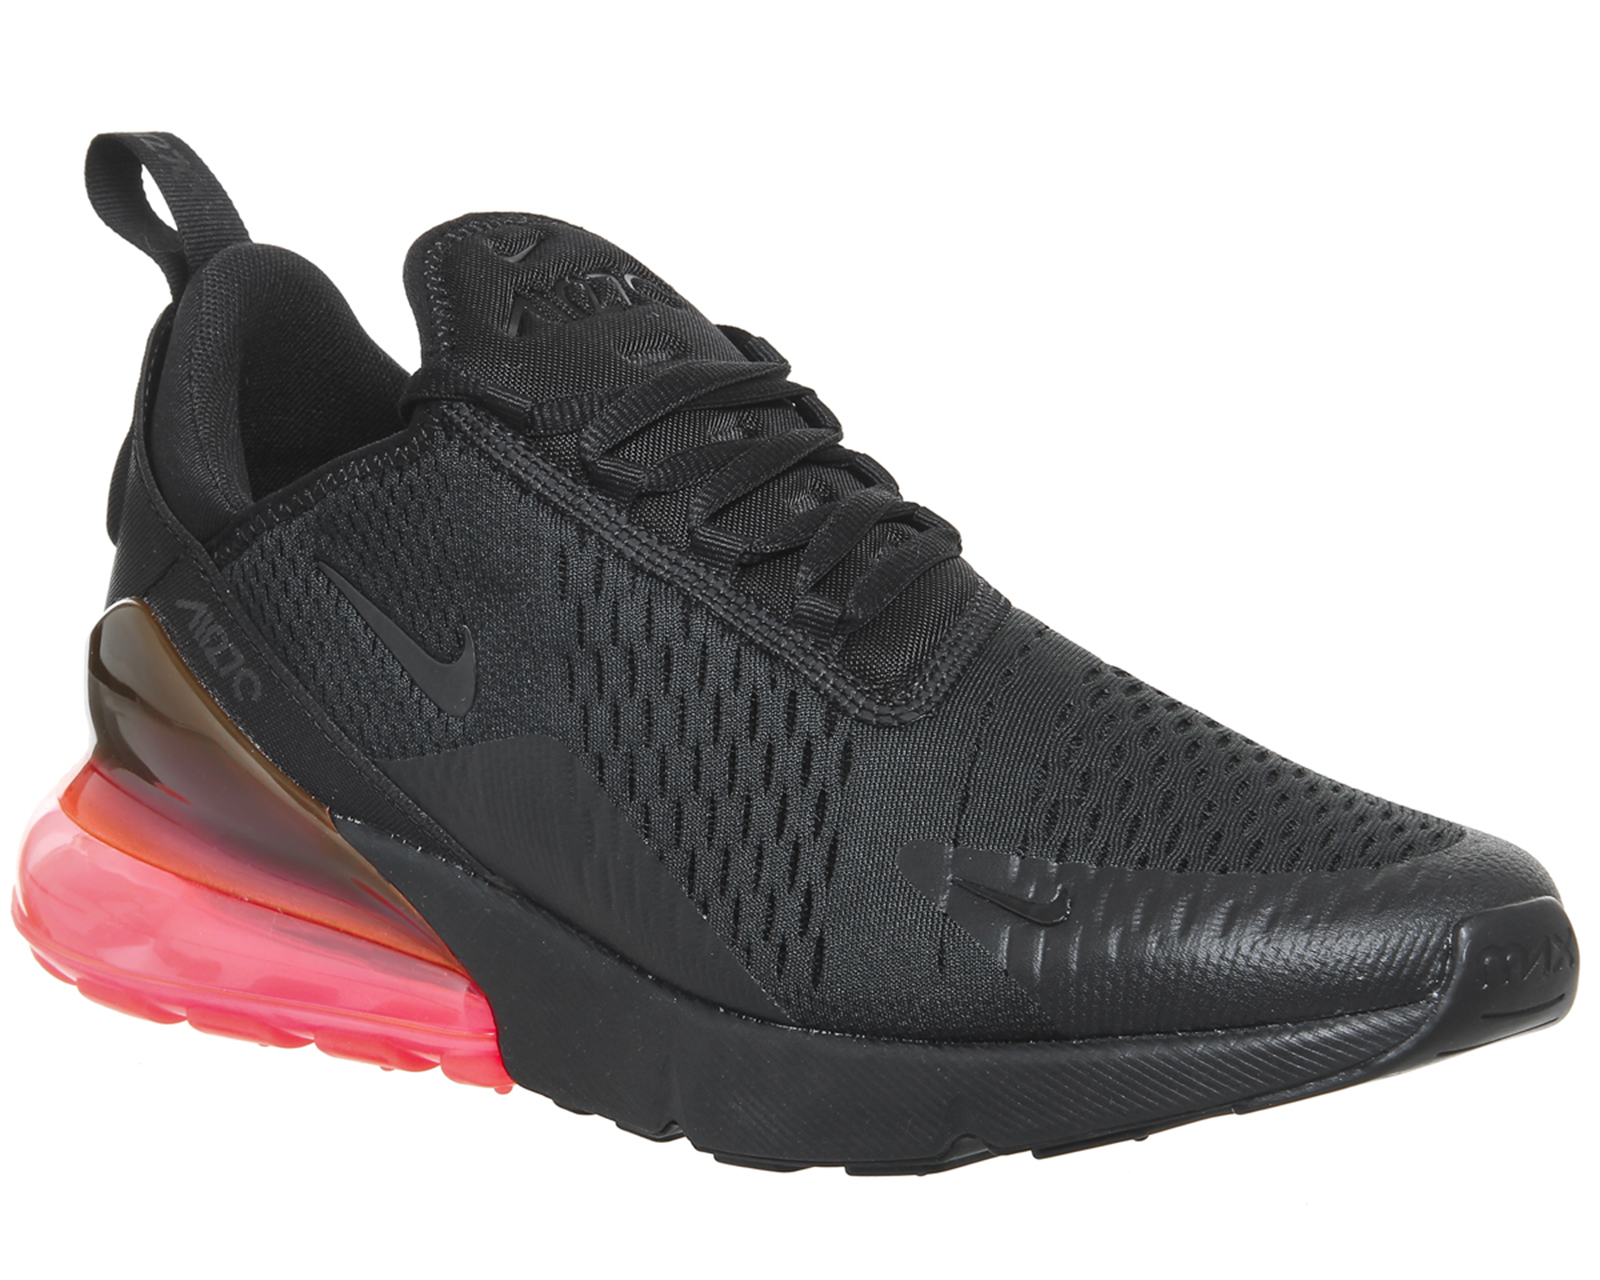 Nike Air Max 270 Trainers Black Hot Punch Qs - His trainers